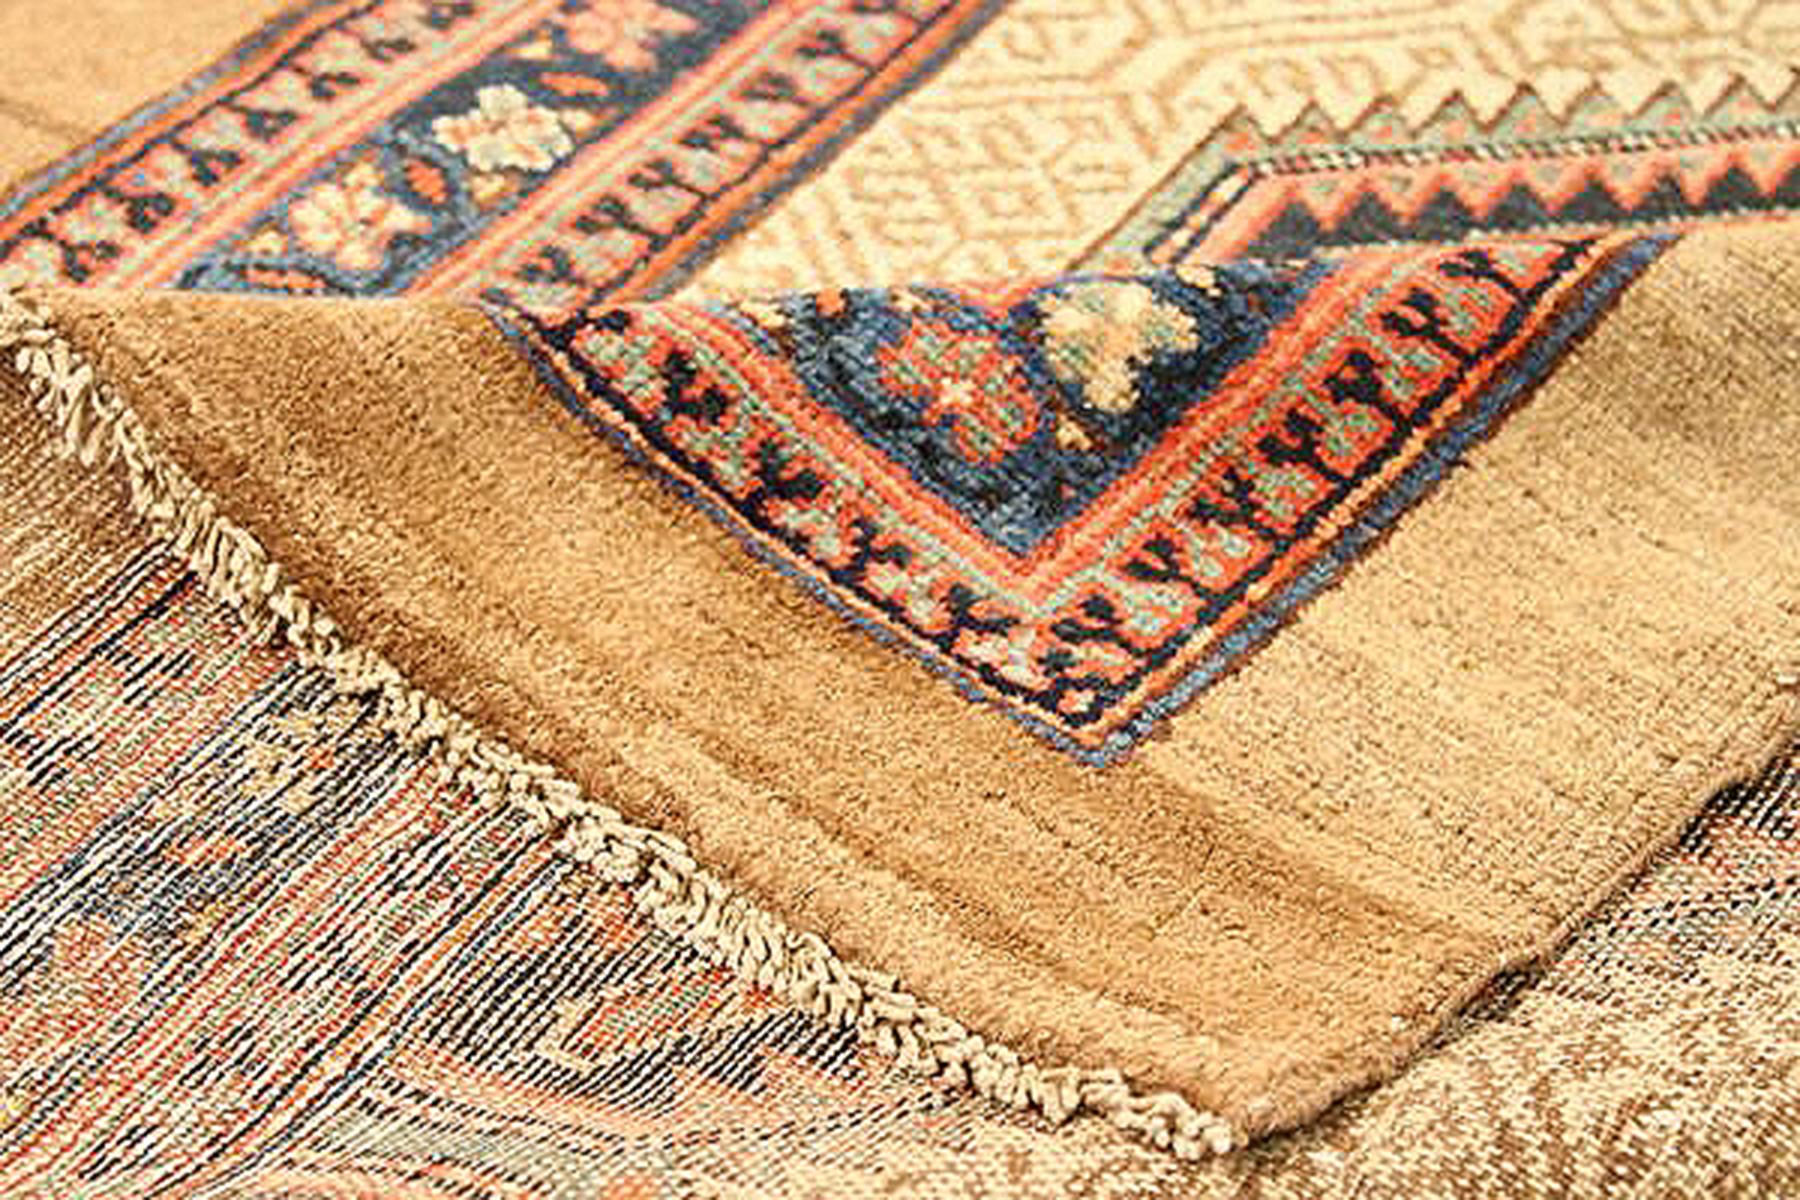 Islamic 1890 Antique Persian Sarab Runner Rug with Brown and Beige Geometric Details For Sale